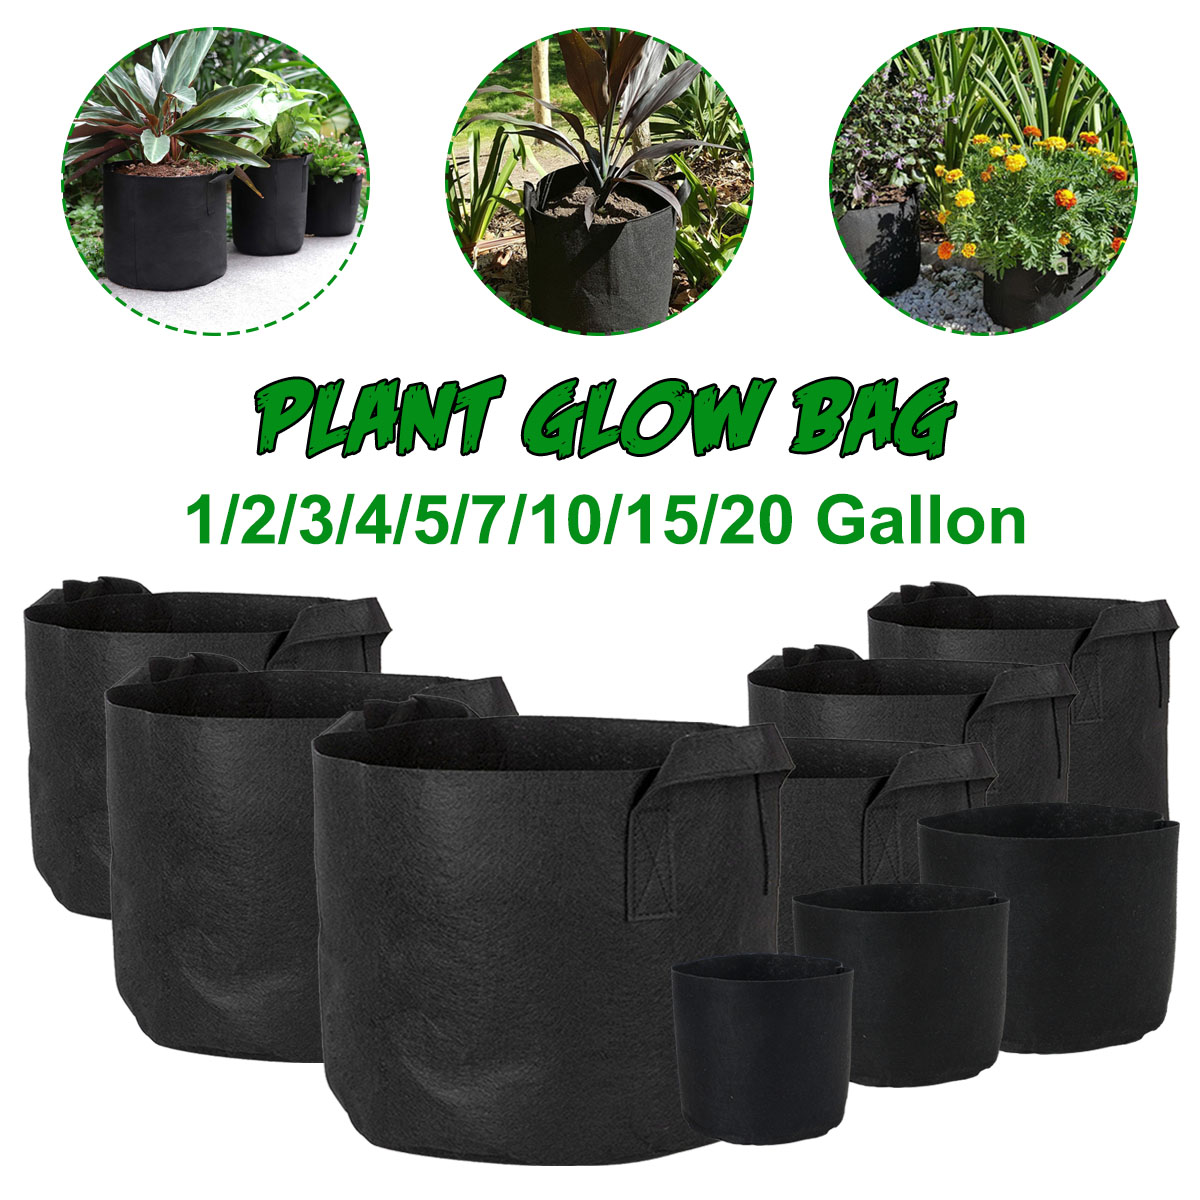 Non-woven-Fabric-Planting-Grow-Box-Vegetable-Flower-Pots-Bag-Planter-Black-with-Handles-1678096-1